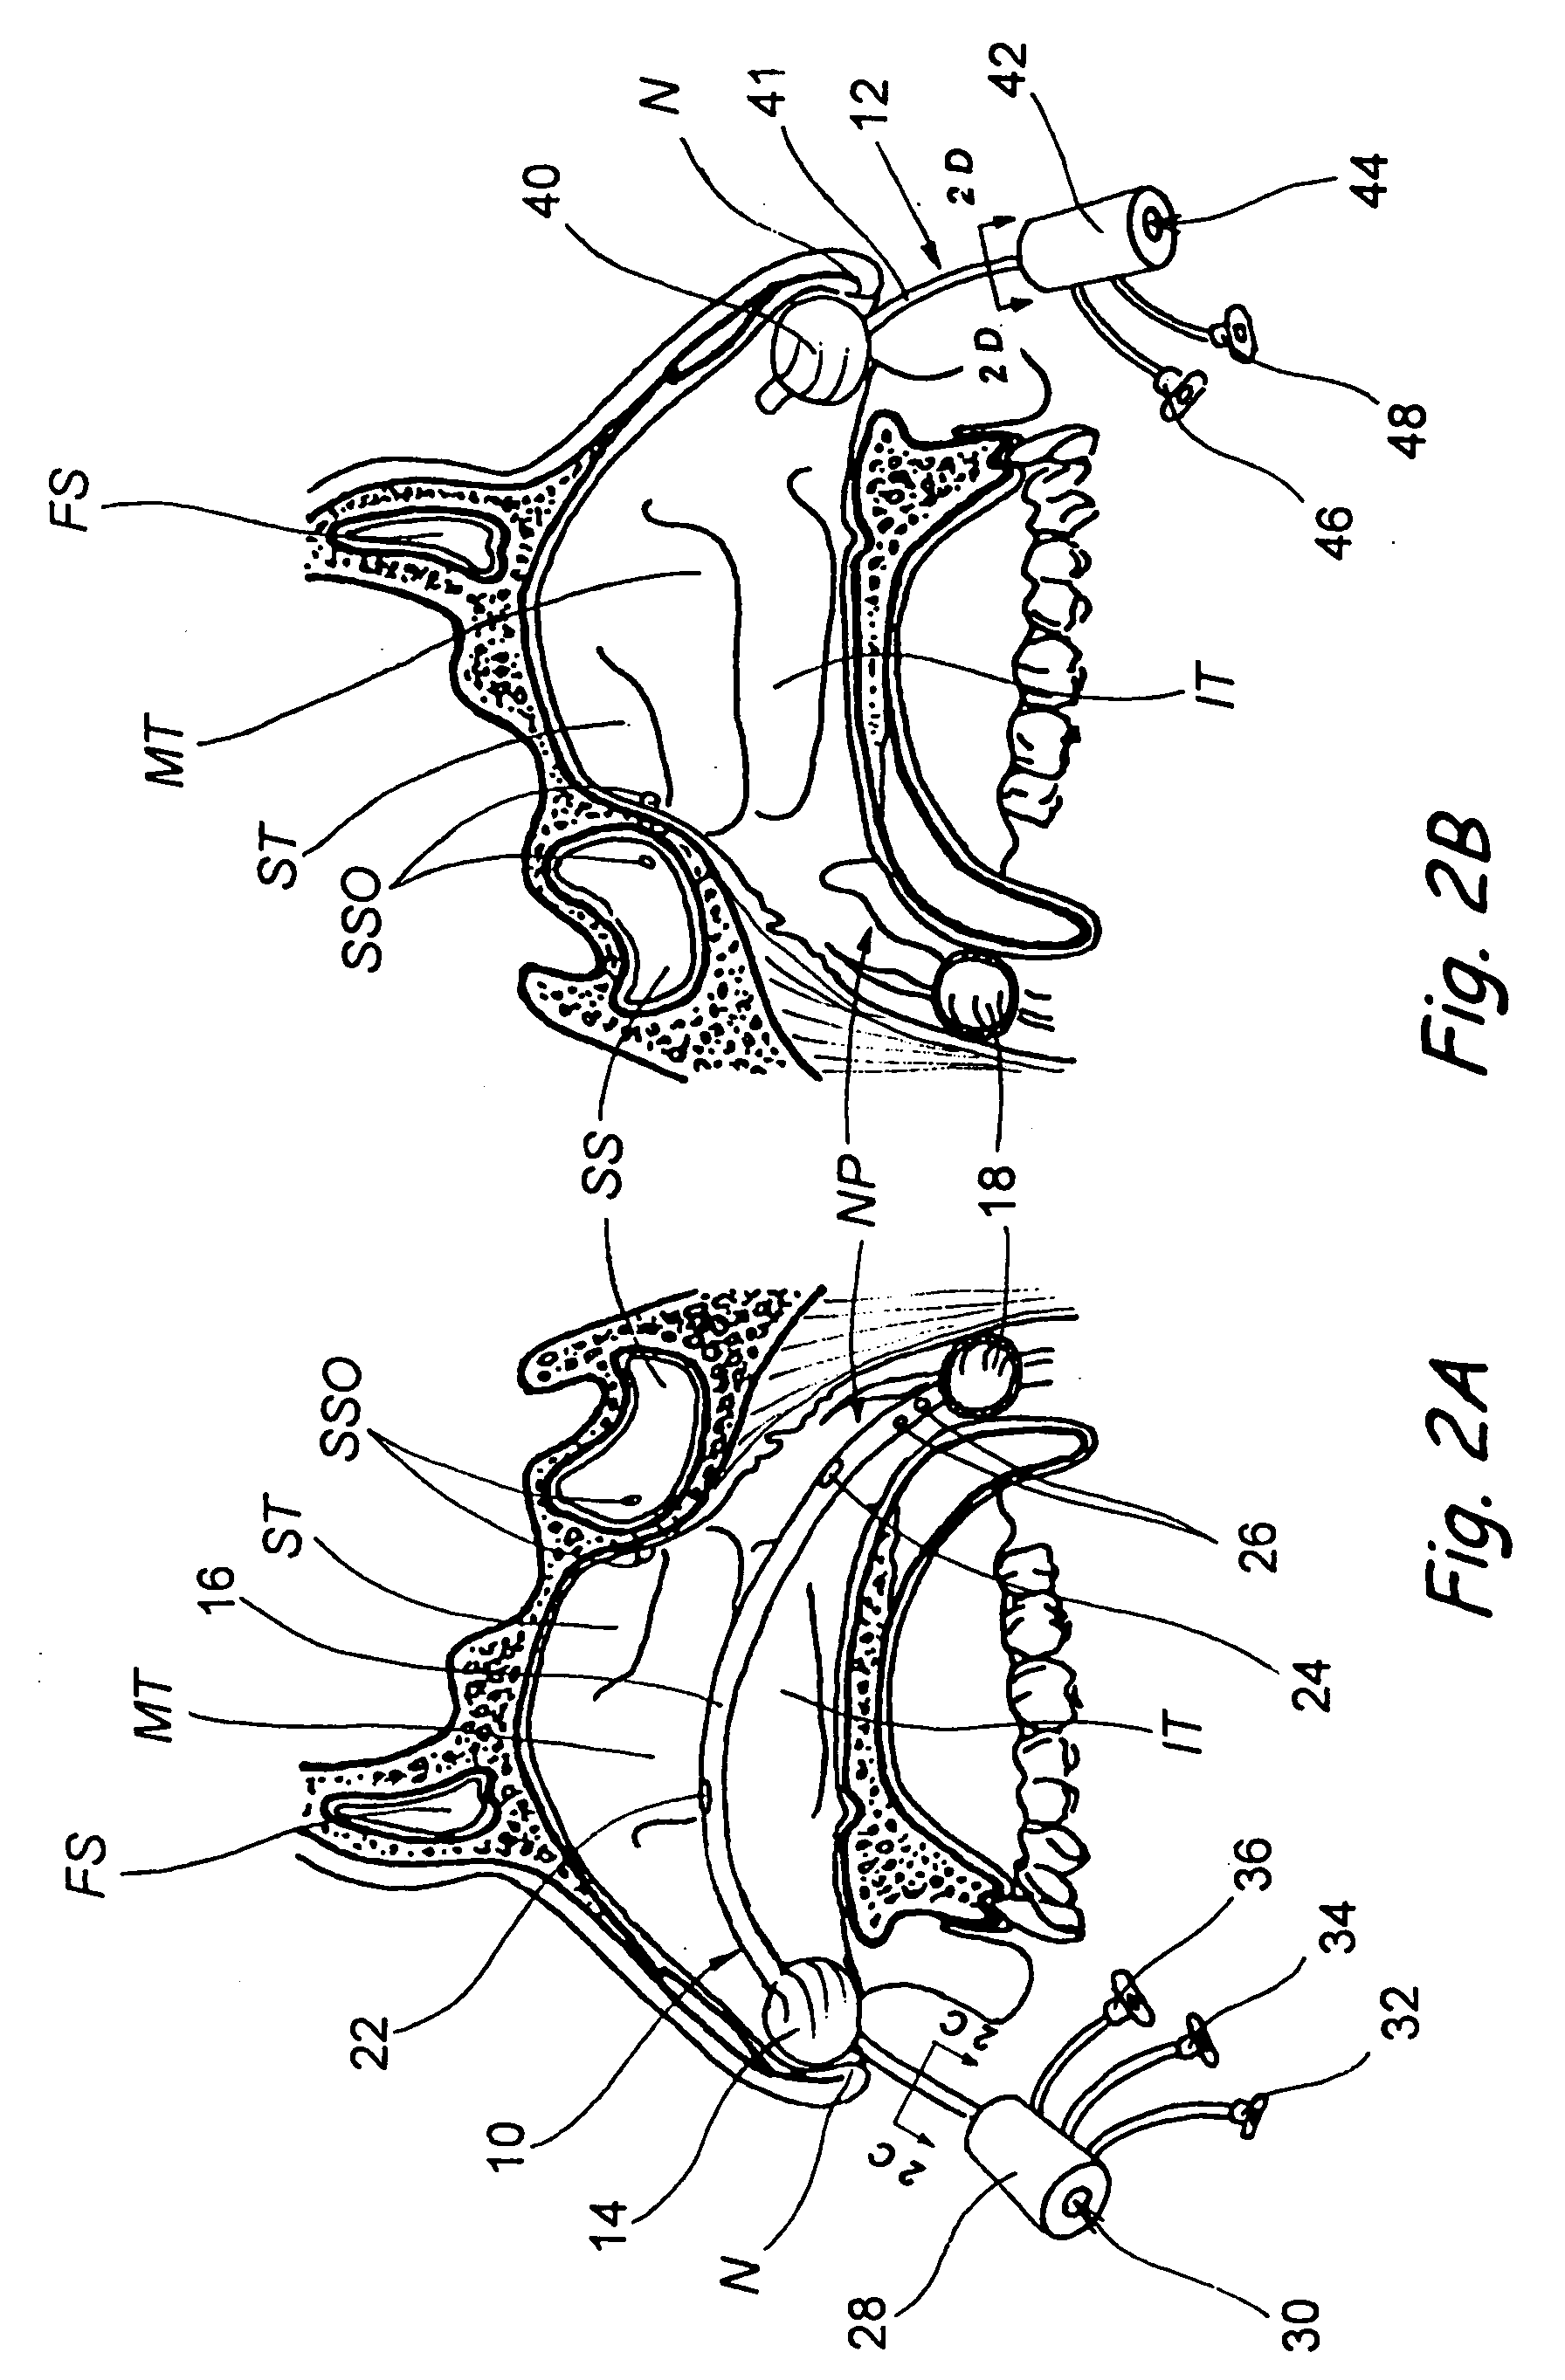 Devices, systems and methods for diagnosing and treating sinusitus and other disorders of the ears, nose and/or throat